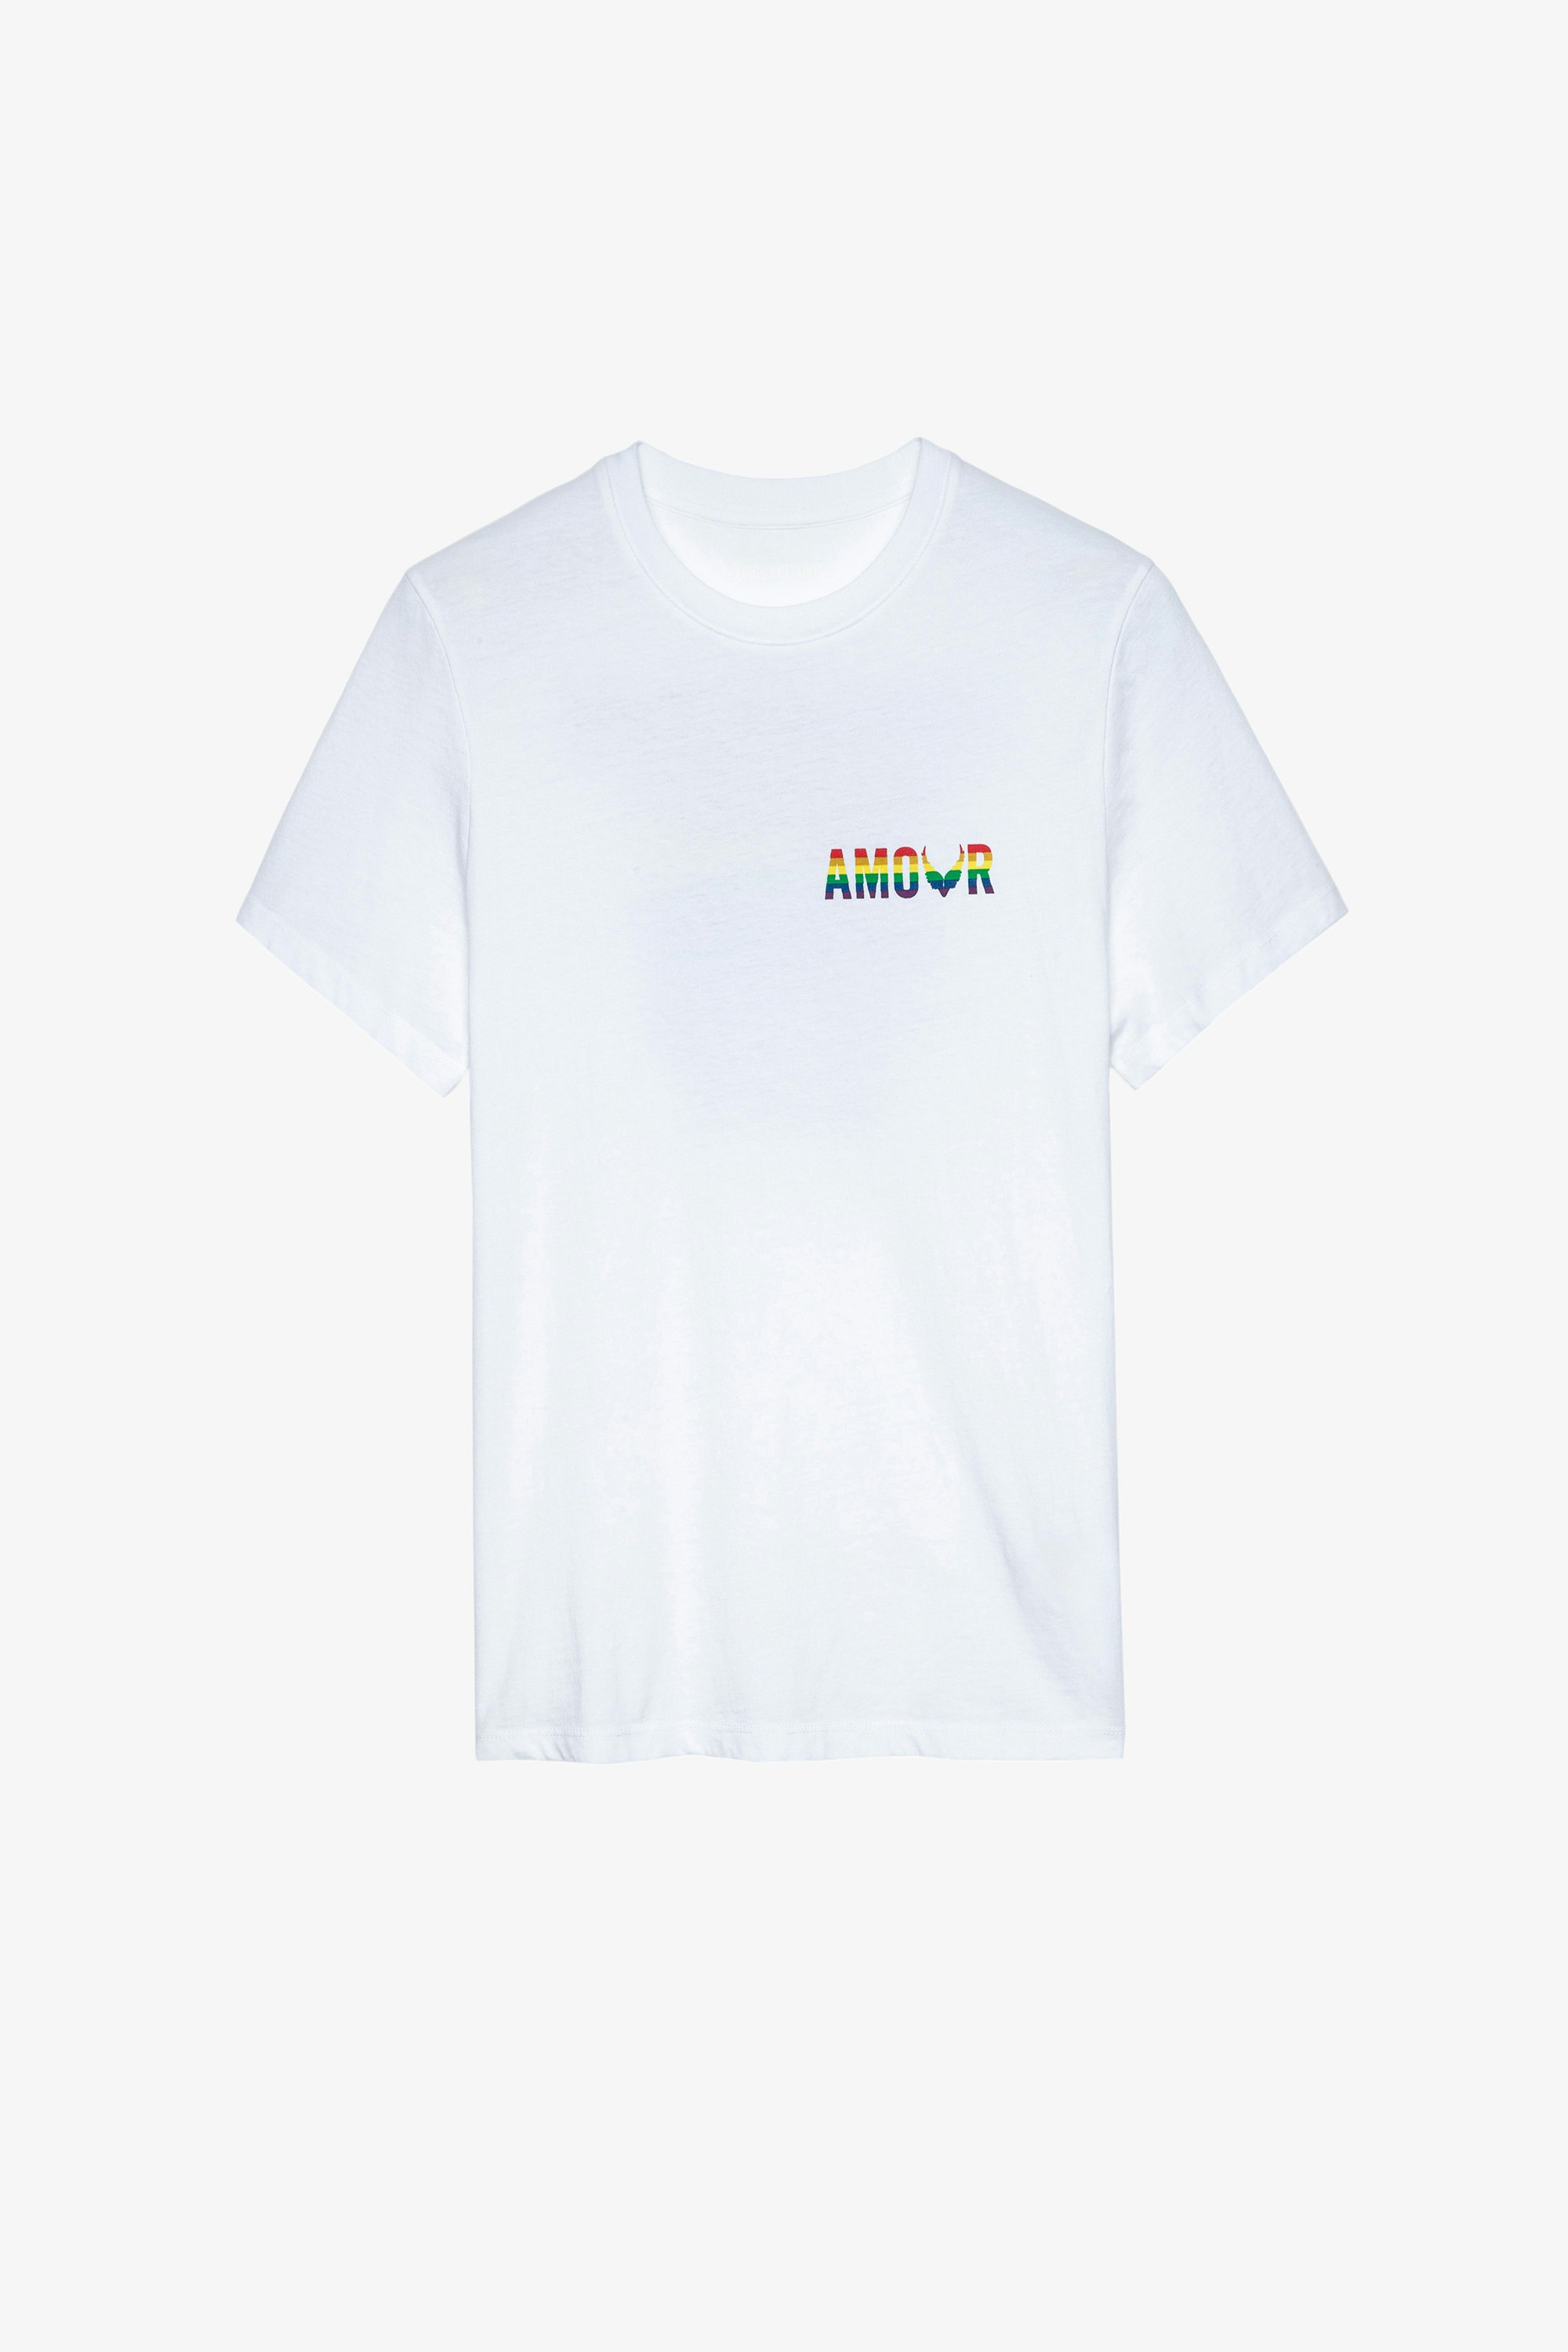 Tommy Amour Wings Ｔシャツ Women’s white cotton T-shirt with Amour print